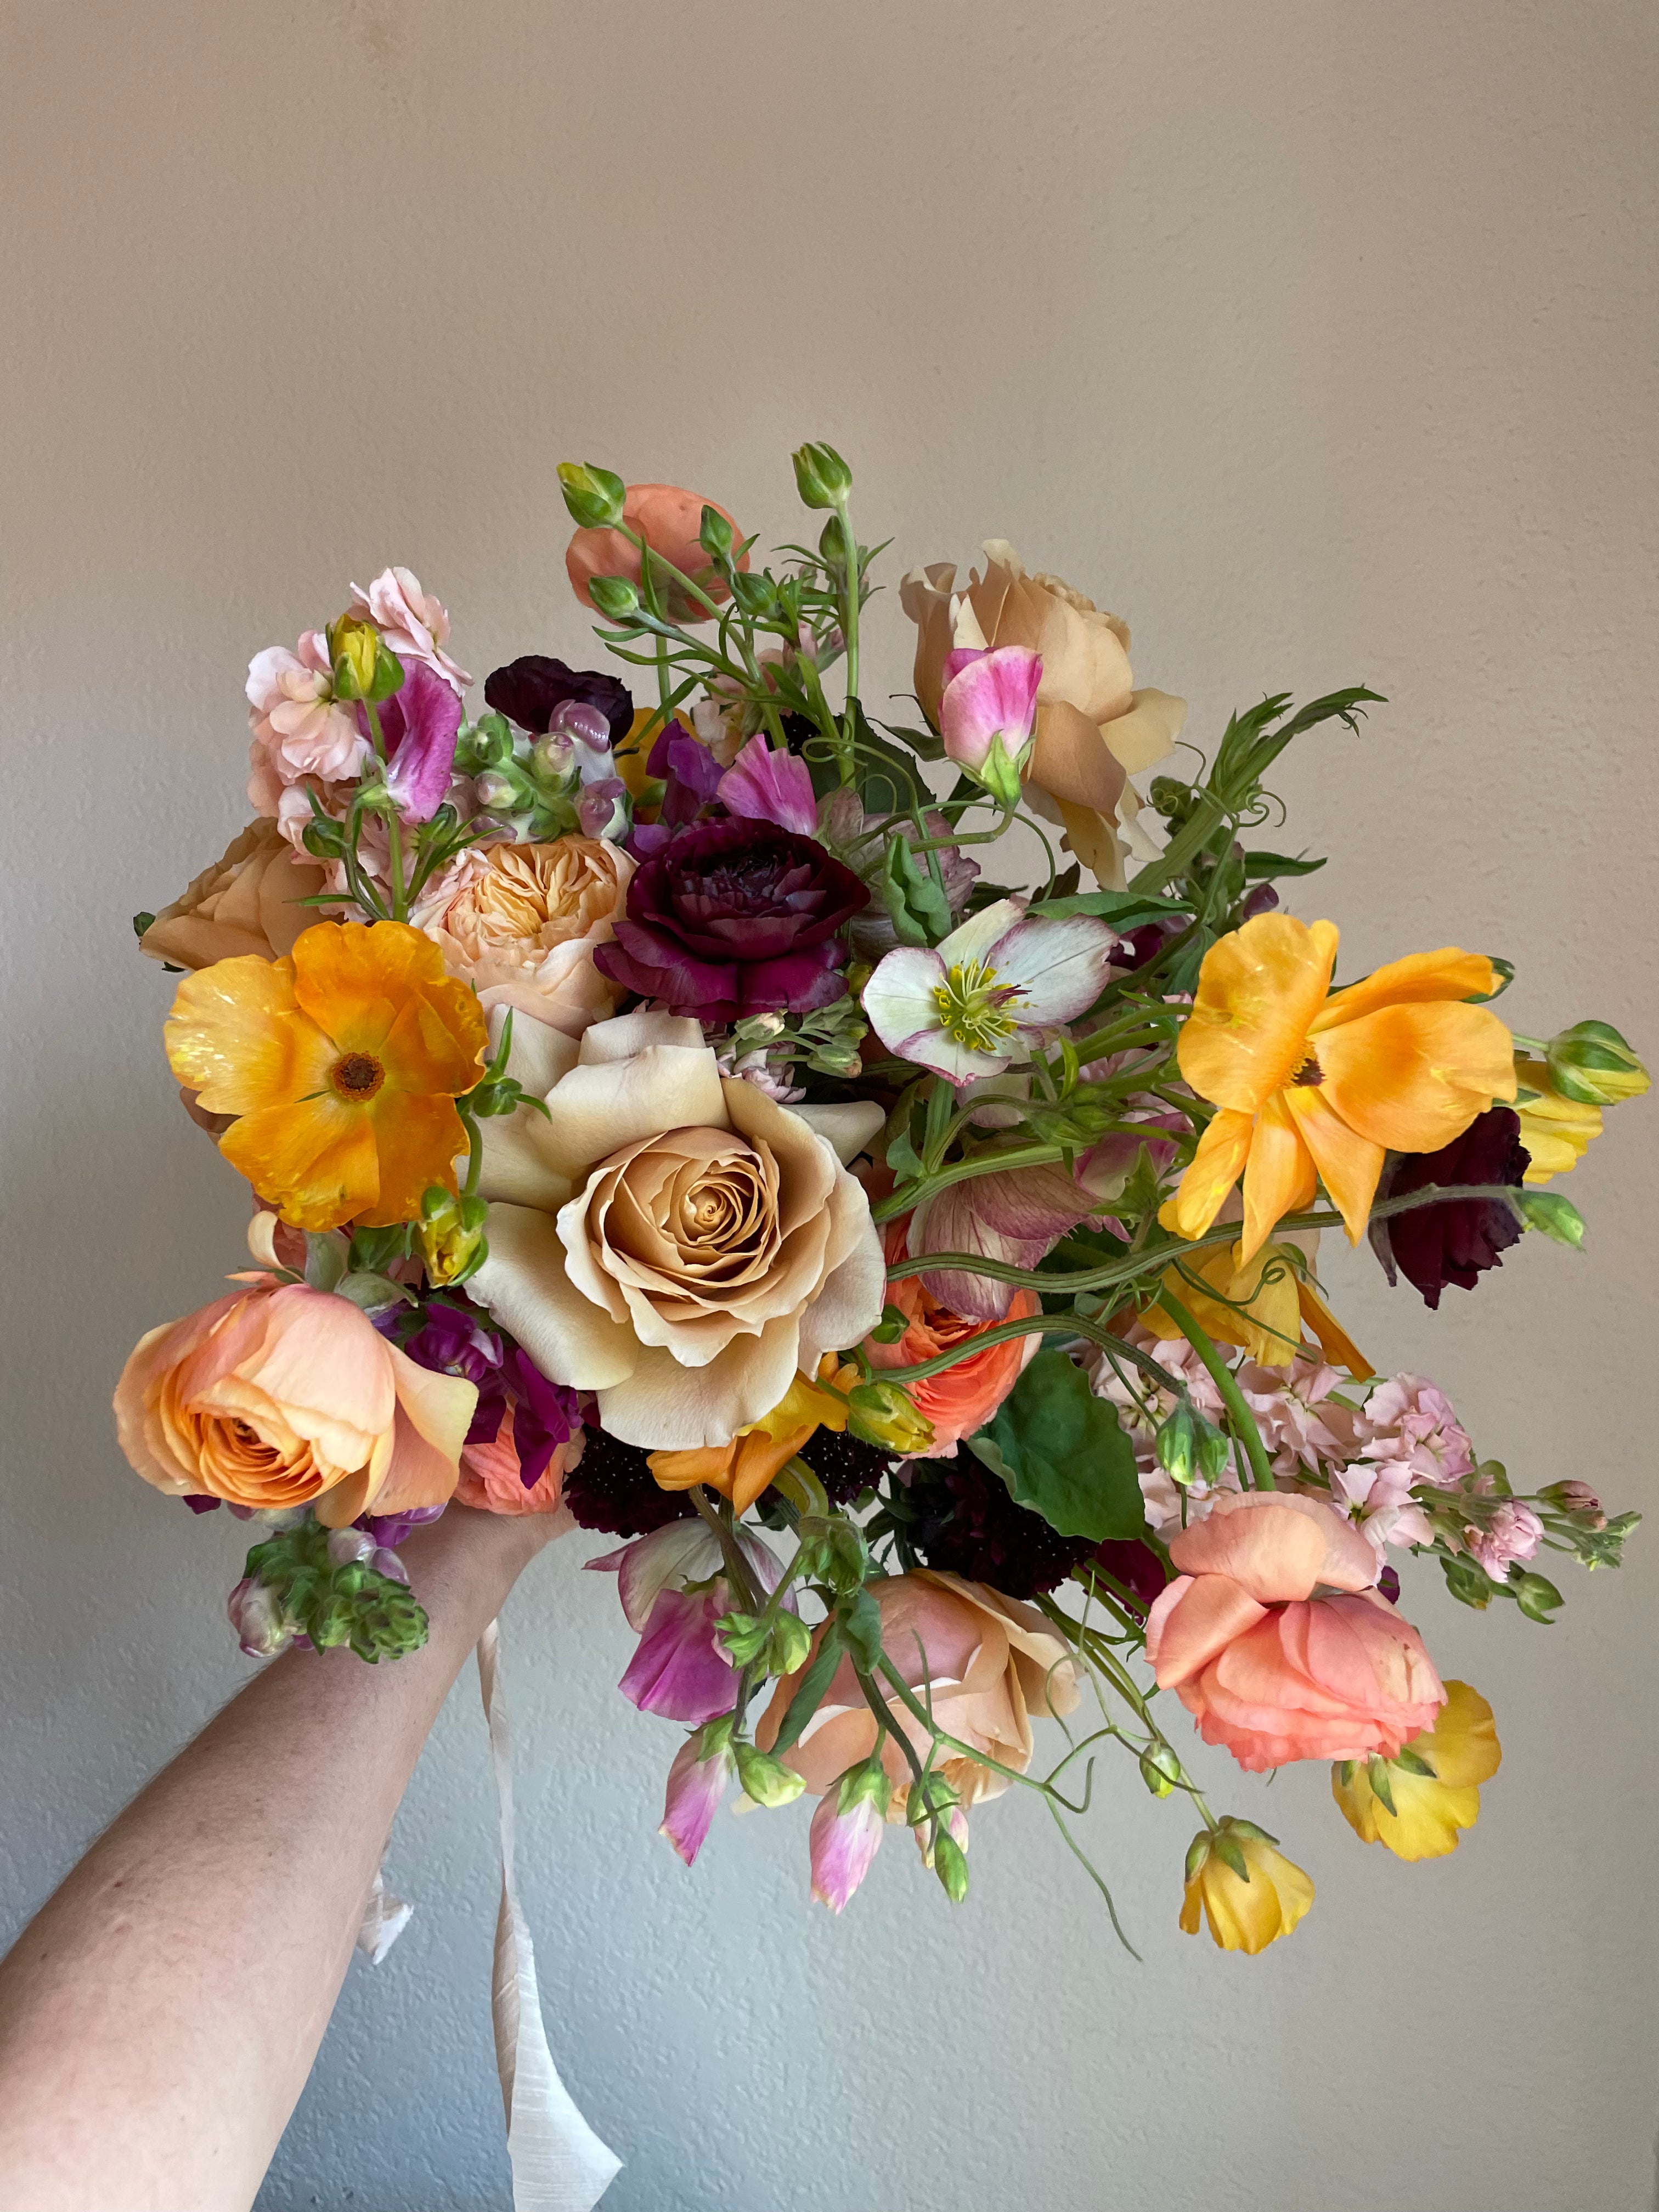 bright and colorful bridal bouquet blending seasonal locally sourced flowers